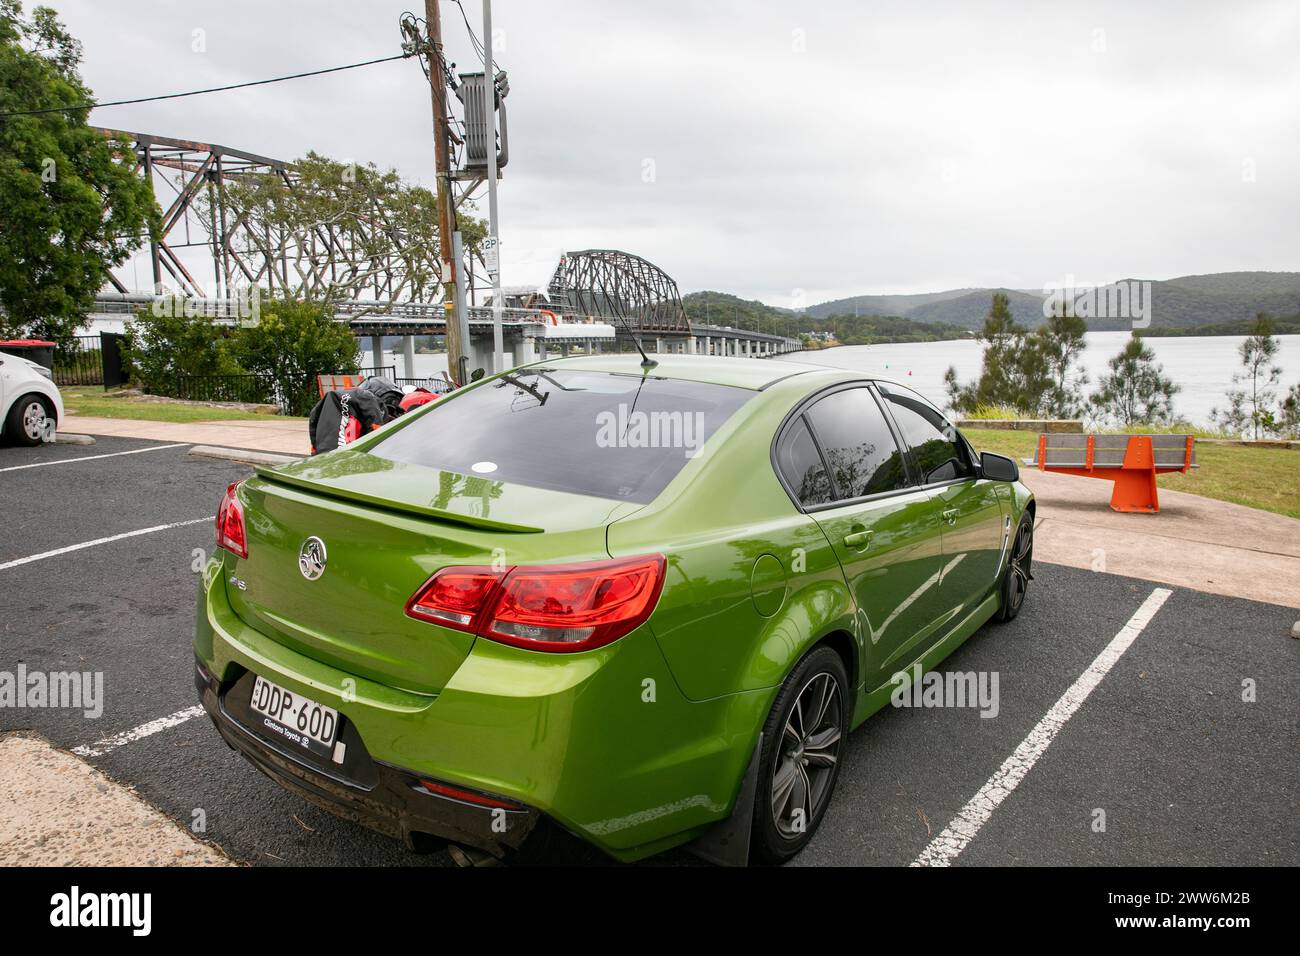 2015 Holden Commodore SV6 family sedan saloon car parked in New South Wales, Holden no longer produces vehicles,Australia Stock Photo